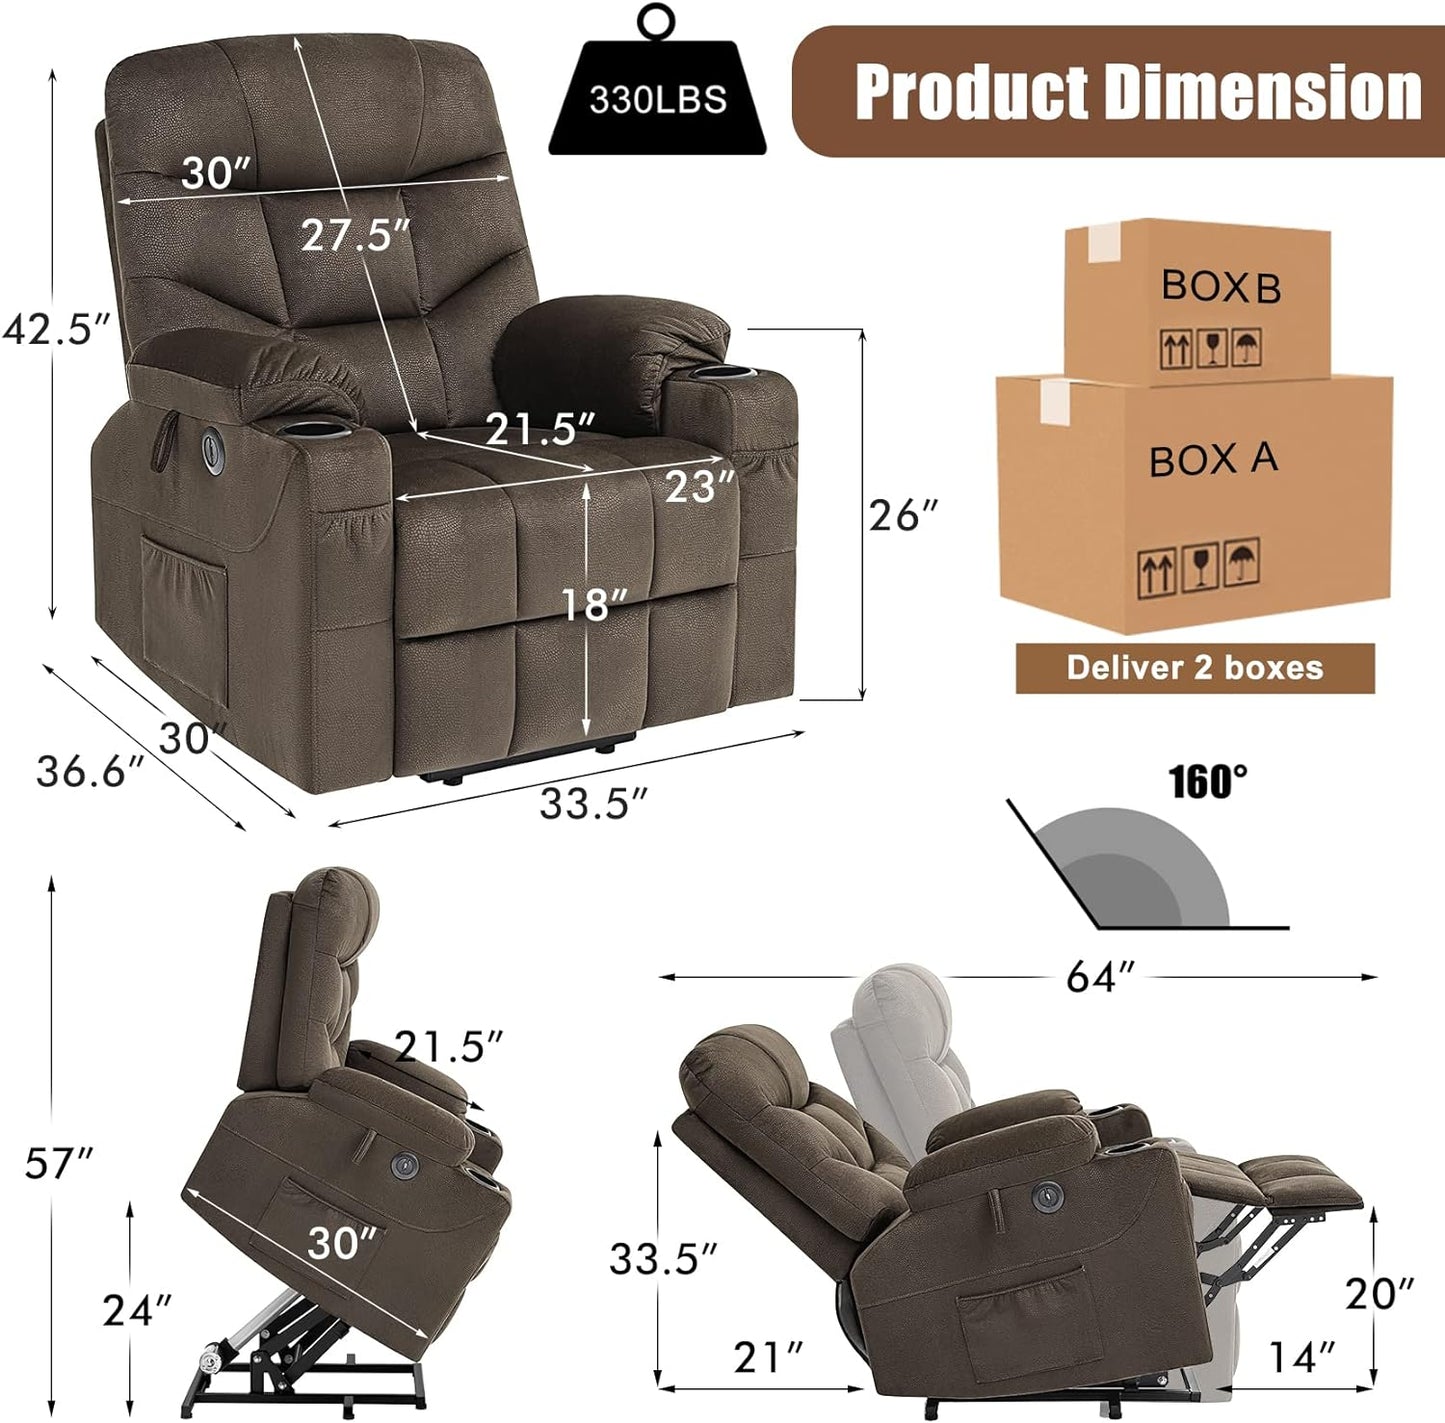 Recliner - CDCASA Power Lift Recliner Chair for Elderly with Heated Vibration Massage, Fabric Electric Power Recliner Chairs for Seniors, Side Pockets,Cup Holders, USB Ports, Remote Control, Brown